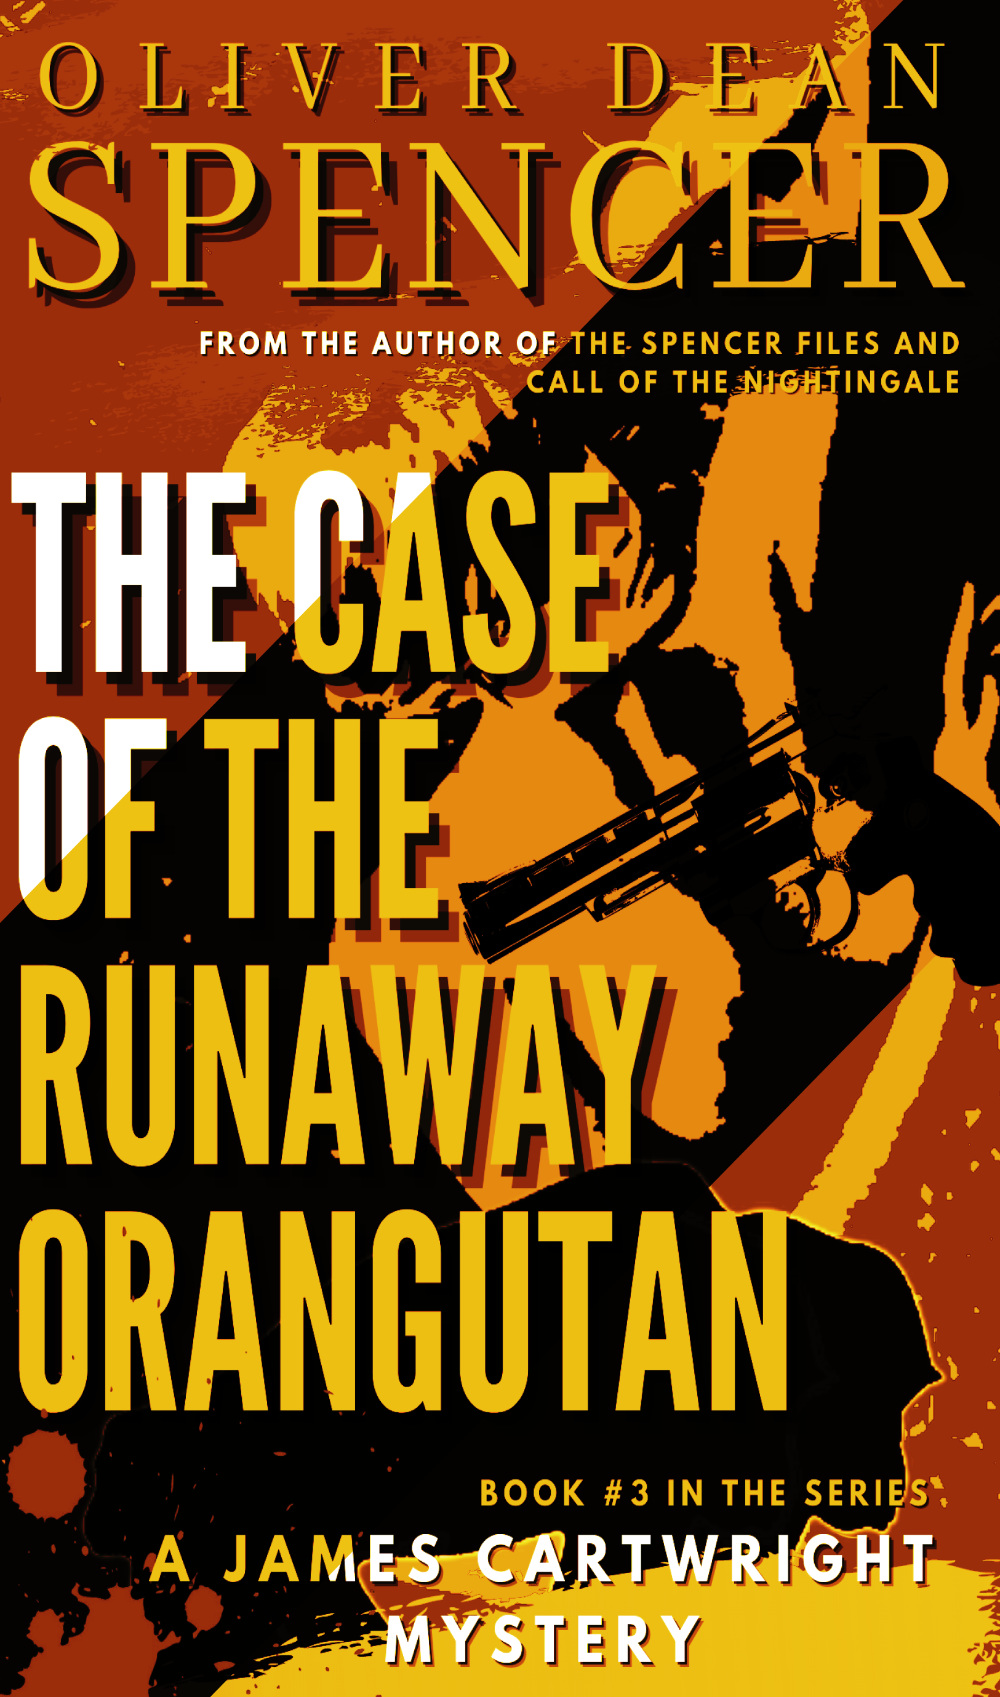 ㋶ Spencer’s Case of the Runaway Orangutan / cover #01 (NFT Collection)